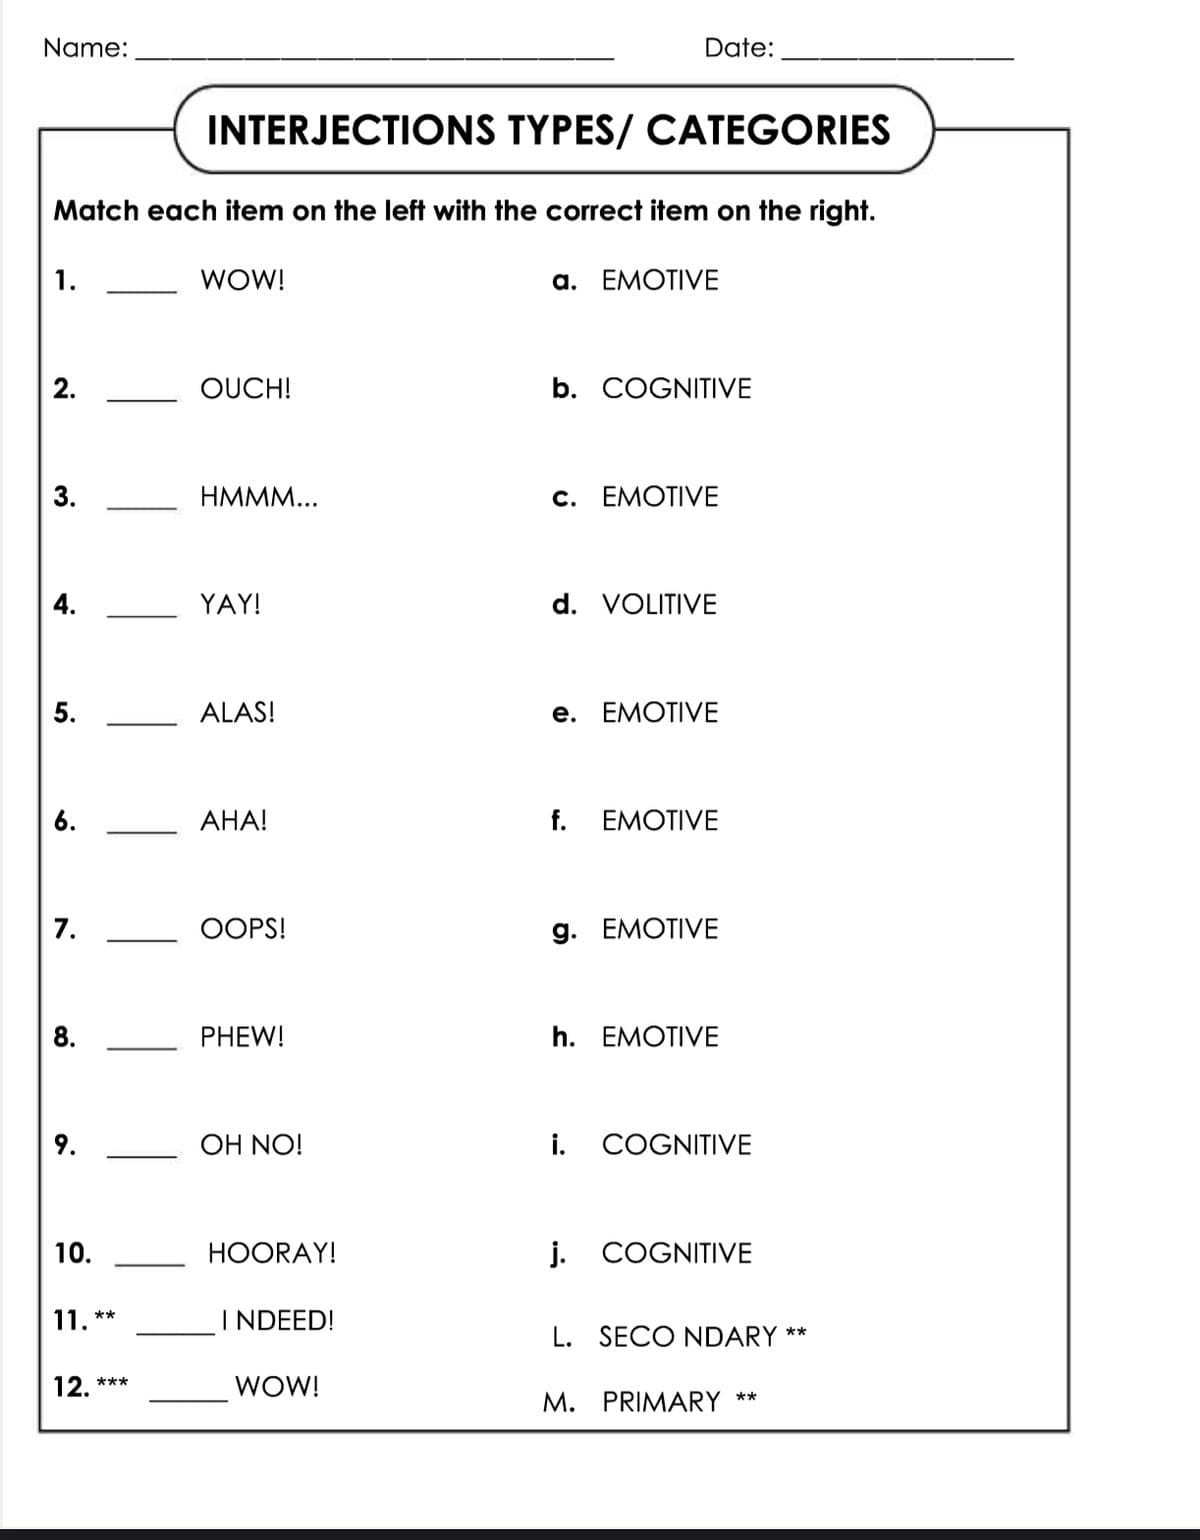 Name:
Date:
INTERJECTIONS TYPES/ CATEGORIES
Match each item on the left with the correct item on the right.
1.
WOW!
a. EMOTIVE
2.
OUCH!
b. COGNITIVE
3.
HMMM...
c. EMOTIVE
4.
YAY!
d. VOLITIVE
5.
ALAS!
e. EMOTIVE
6.
AHA!
f. EMOTIVE
7.
OOPS!
g. EMOTIVE
8.
PHEW!
h. EMOTIVE
OH NO!
i. COGNITIVE
10.
11. **
12. ***
HOORAY!
j. COGNITIVE
L. SECONDARY
**
I NDEED!
WOW!
M. PRIMARY **